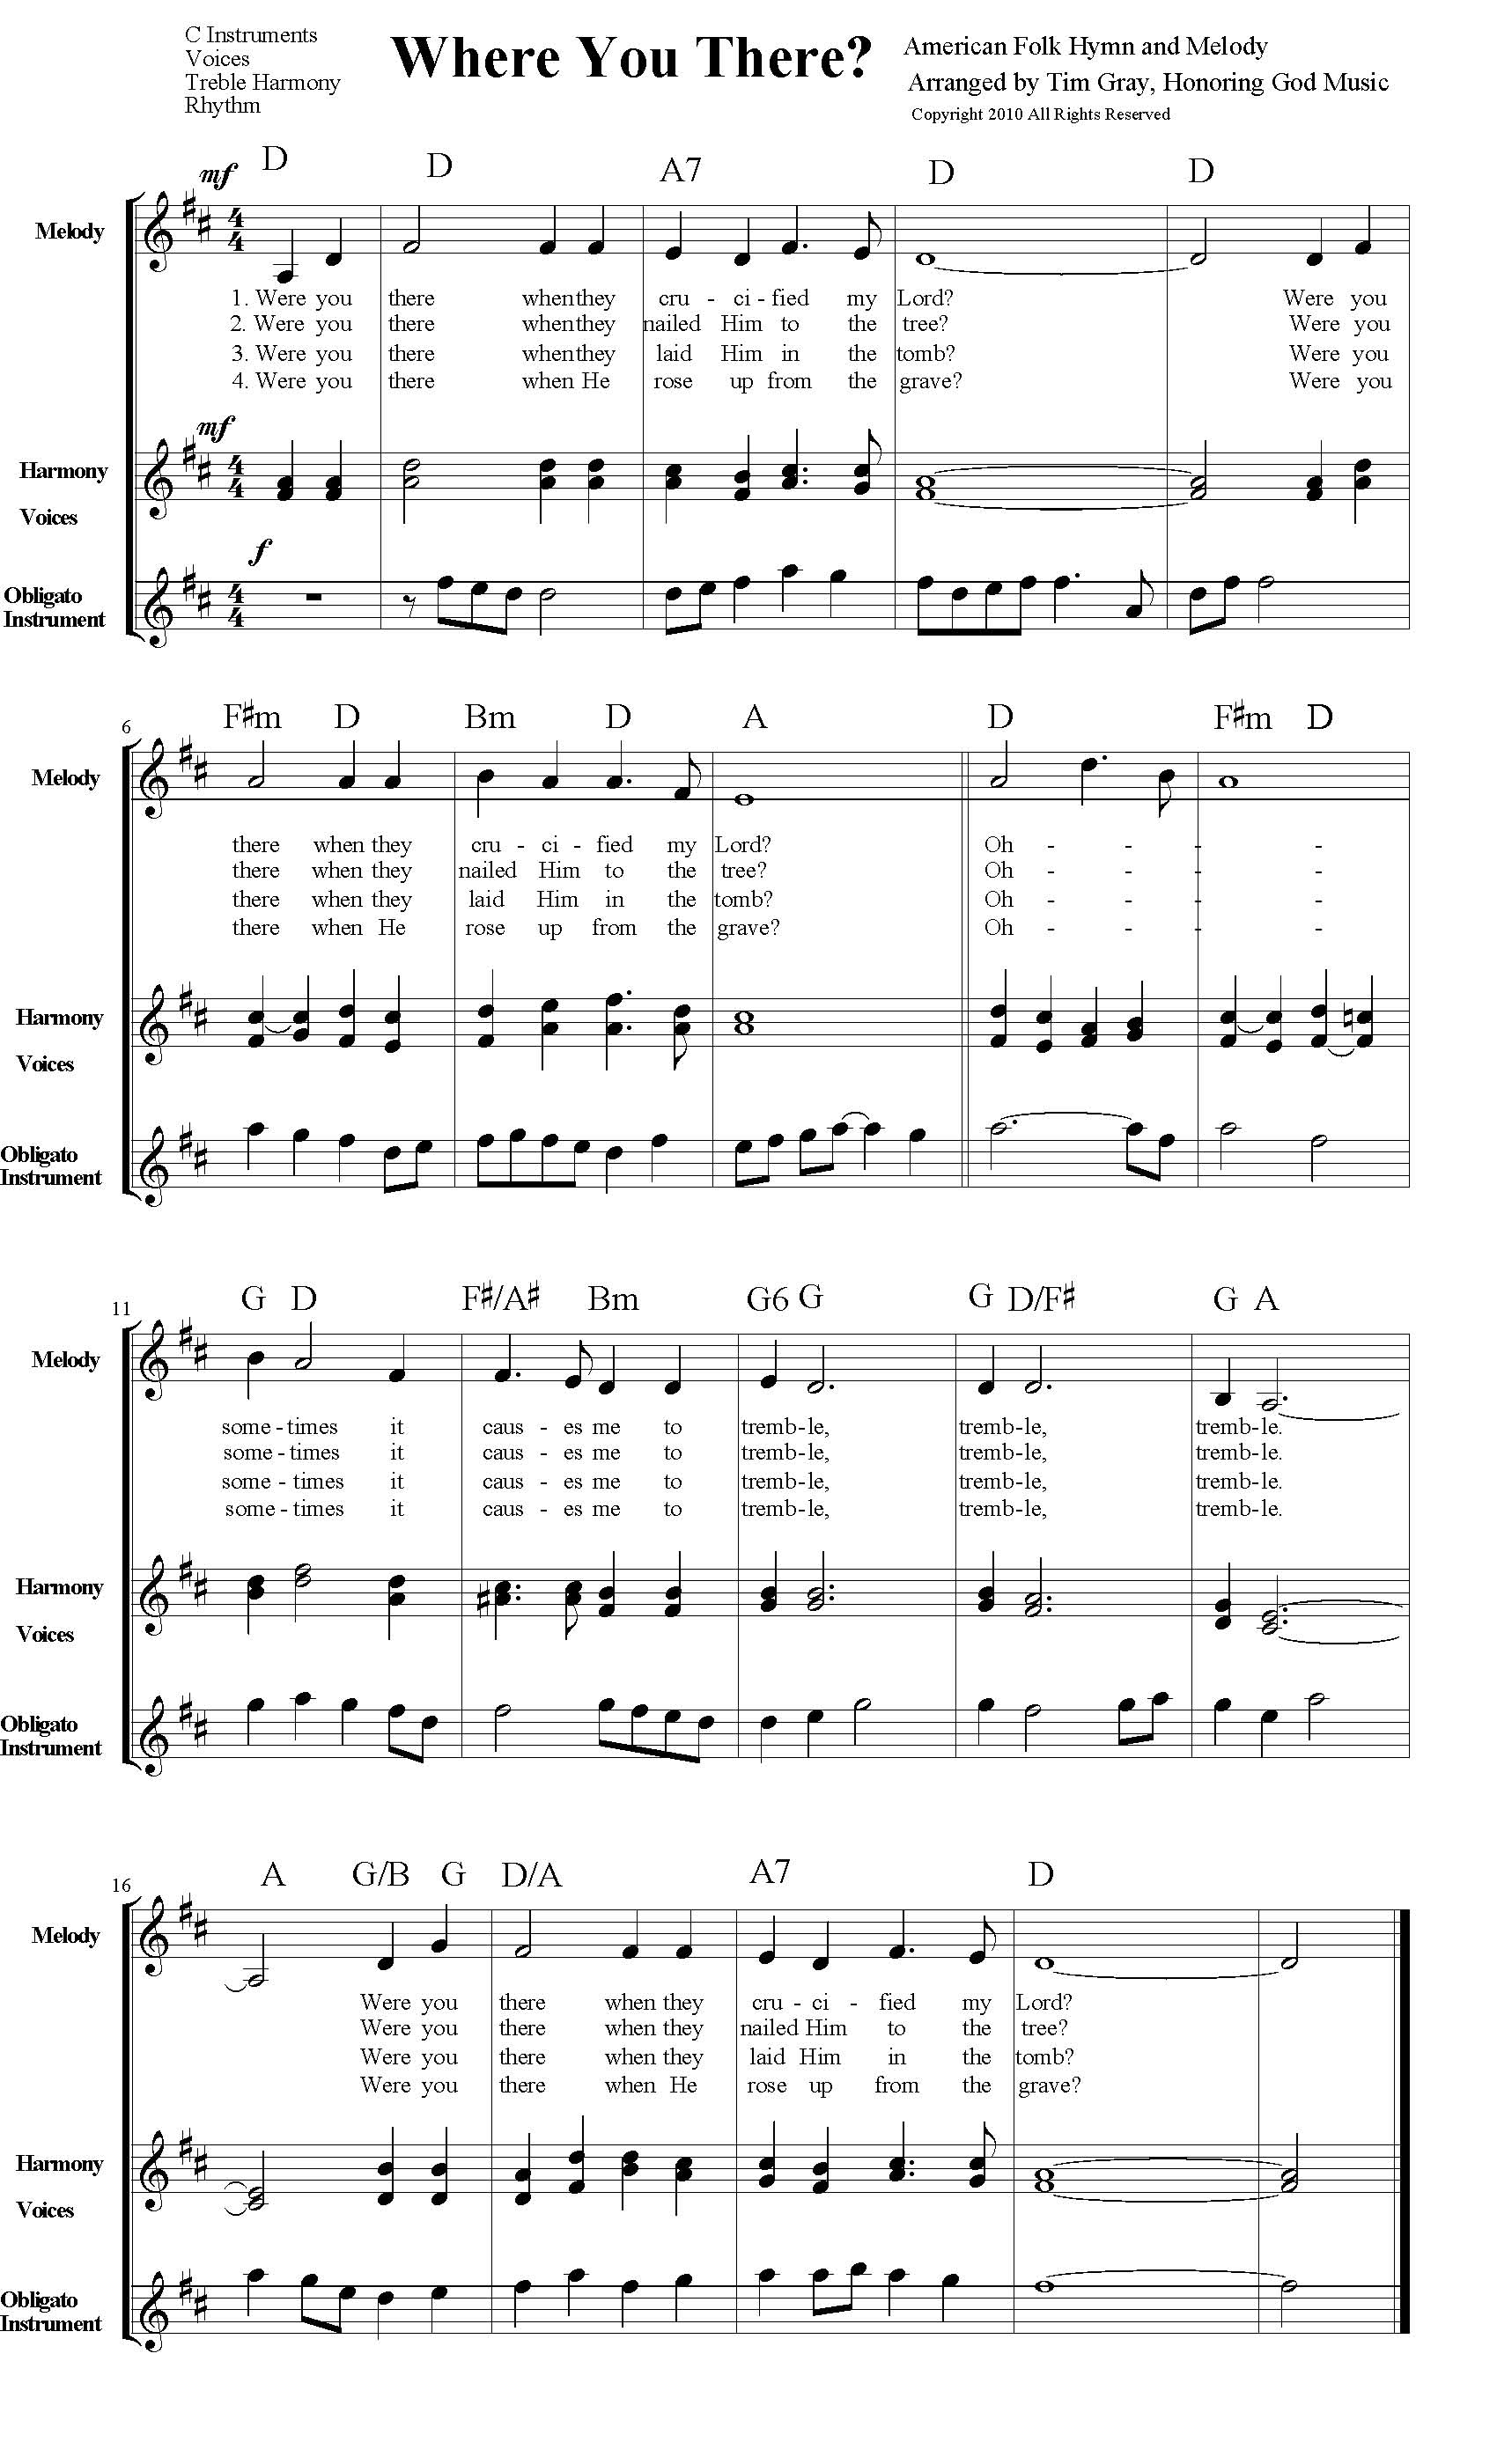 Where You There? TH4CW Traditional Hymns for Contemporary Worship sample page on HonoringGodMusic.com